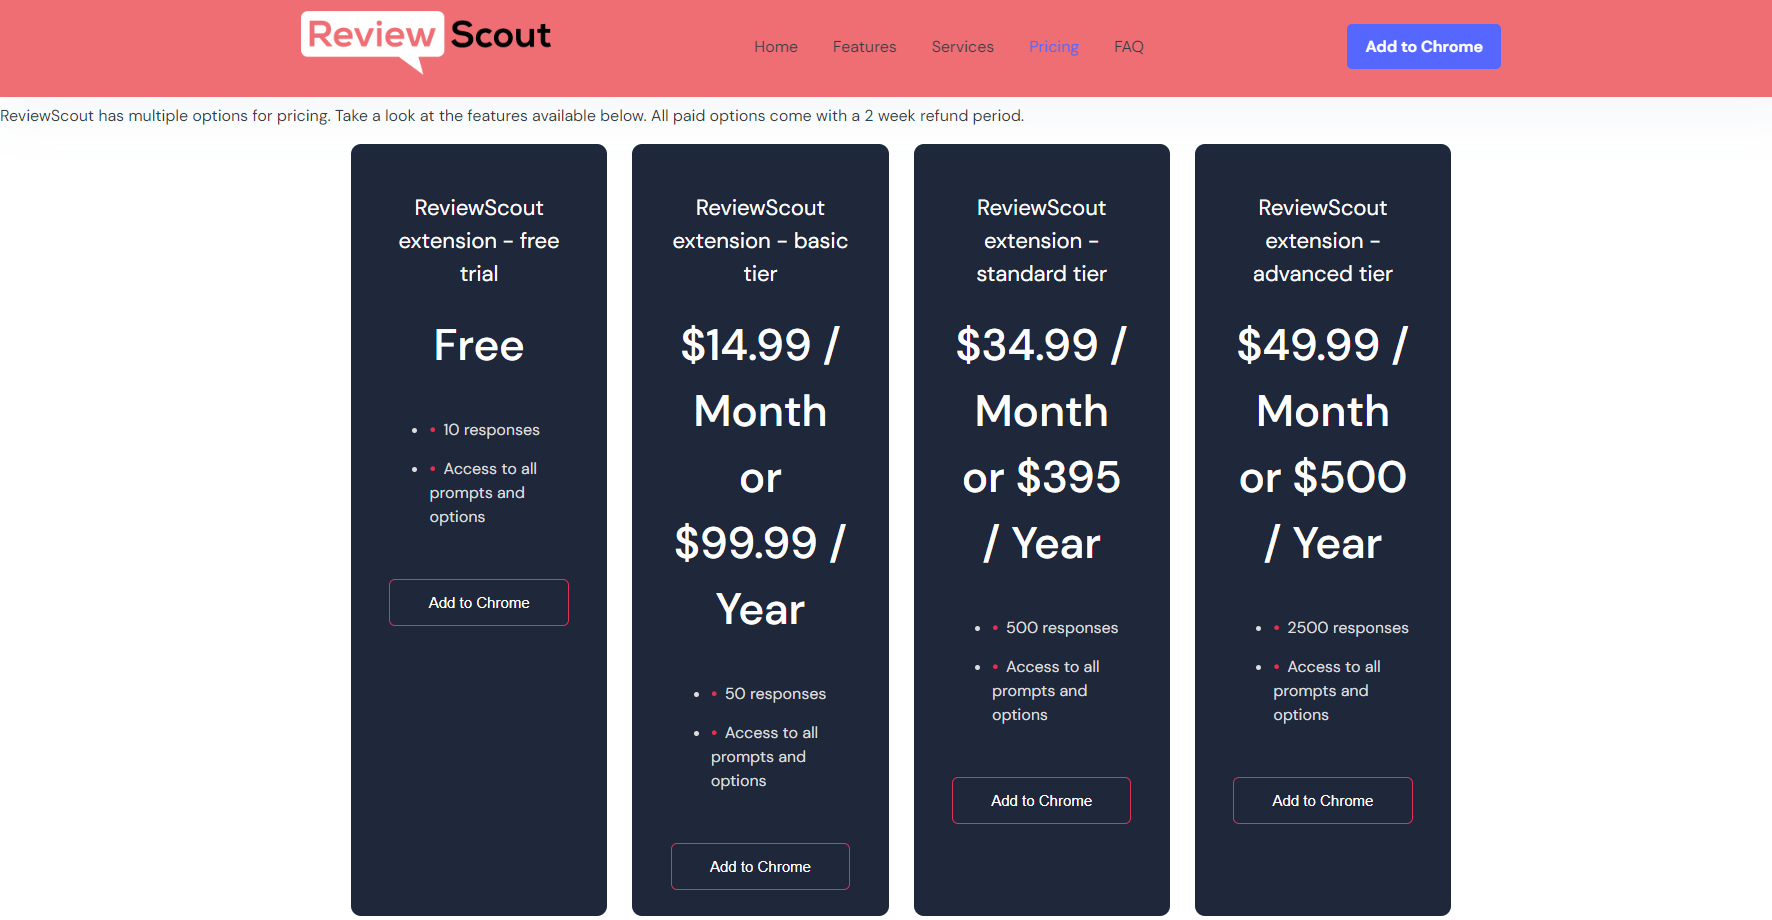 ReviewScout Pricing